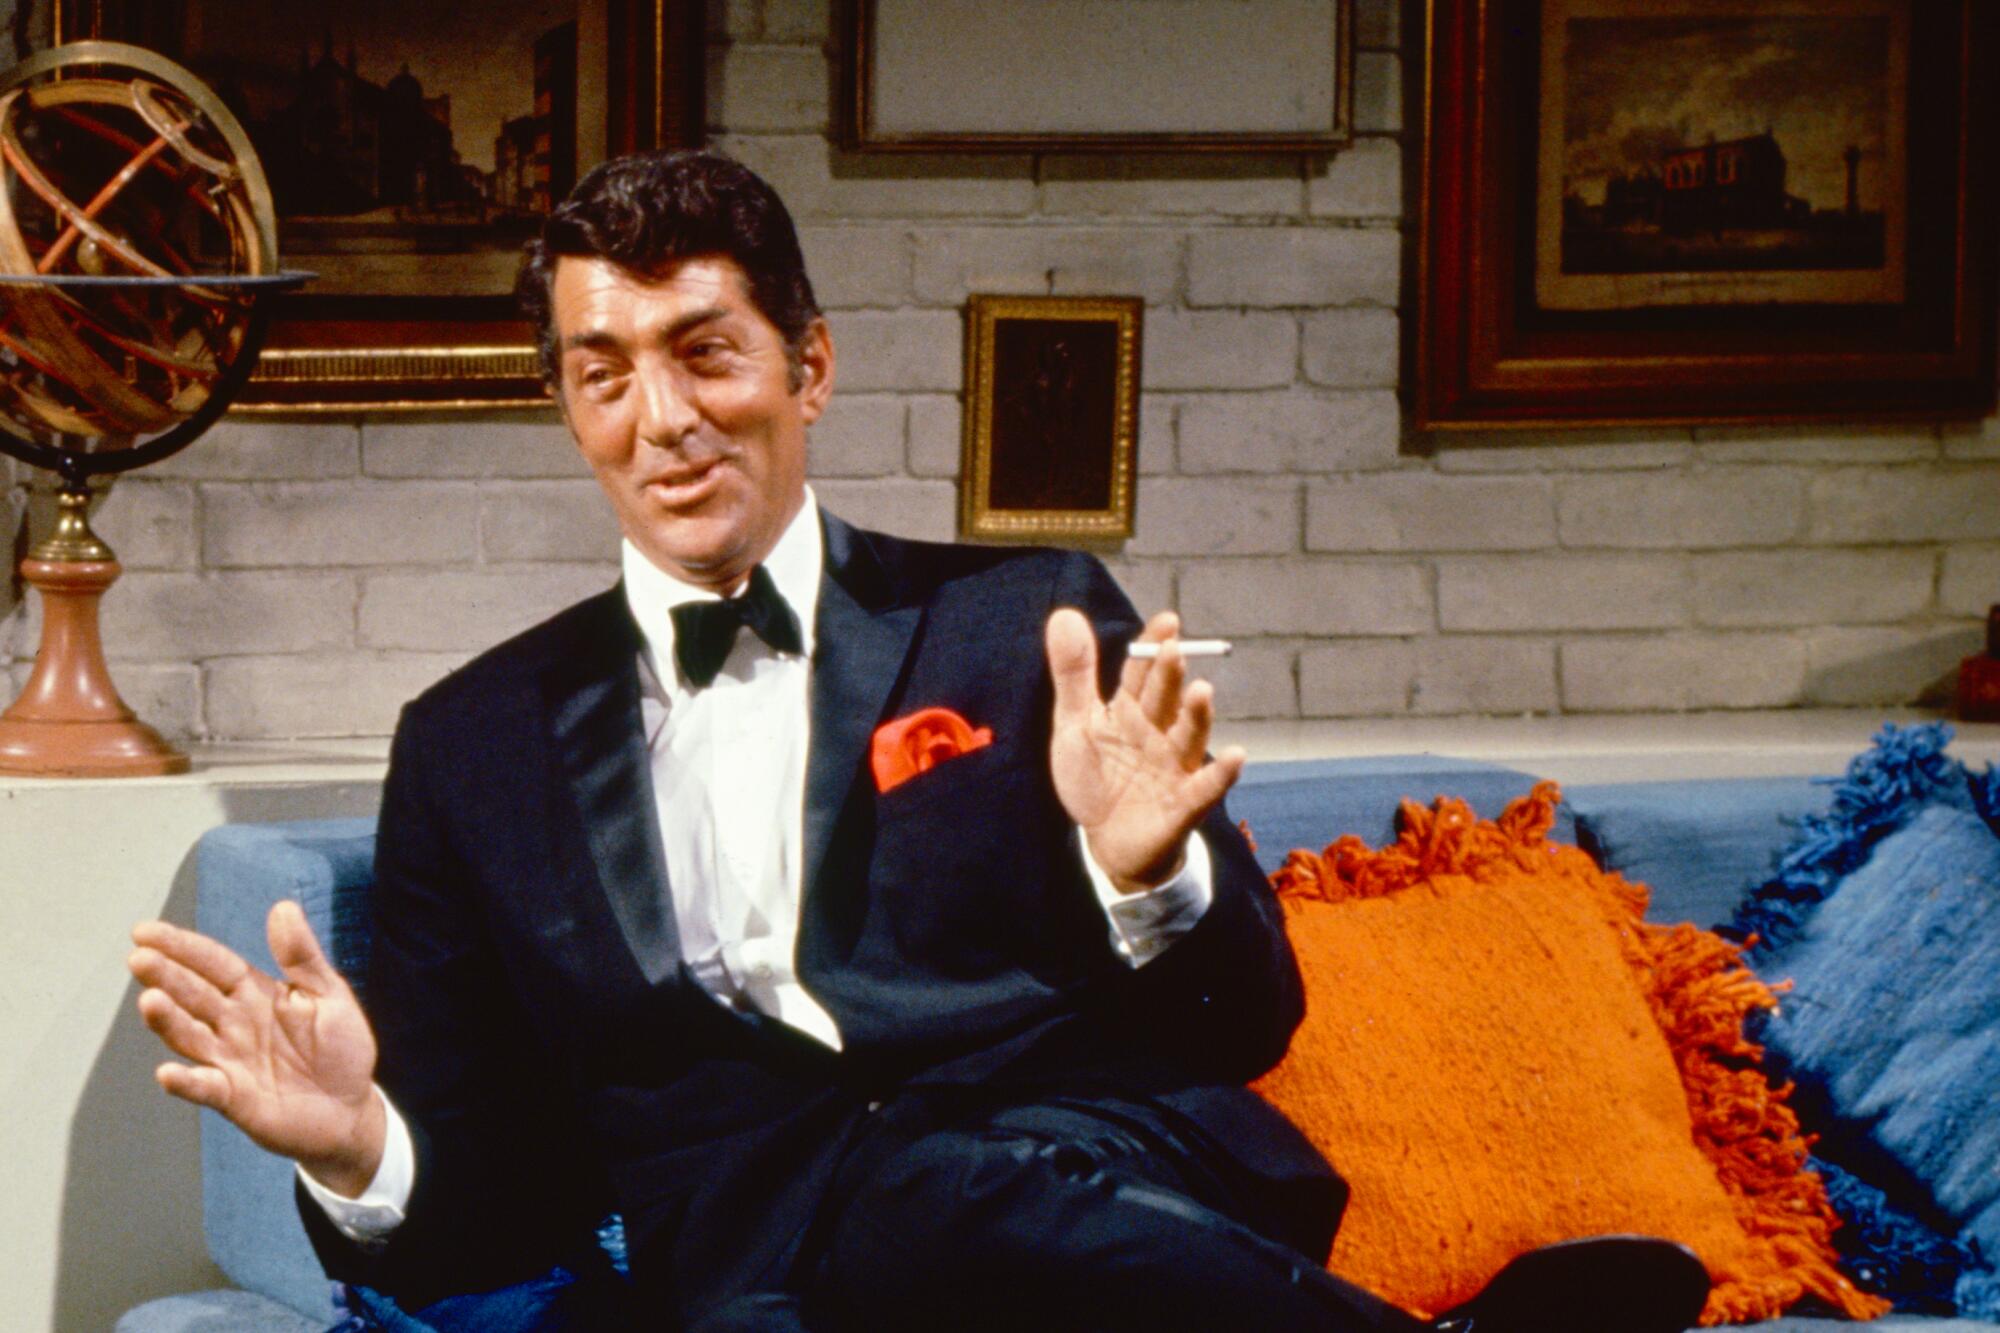 A man in a tuxedo lounges on a blue sofa